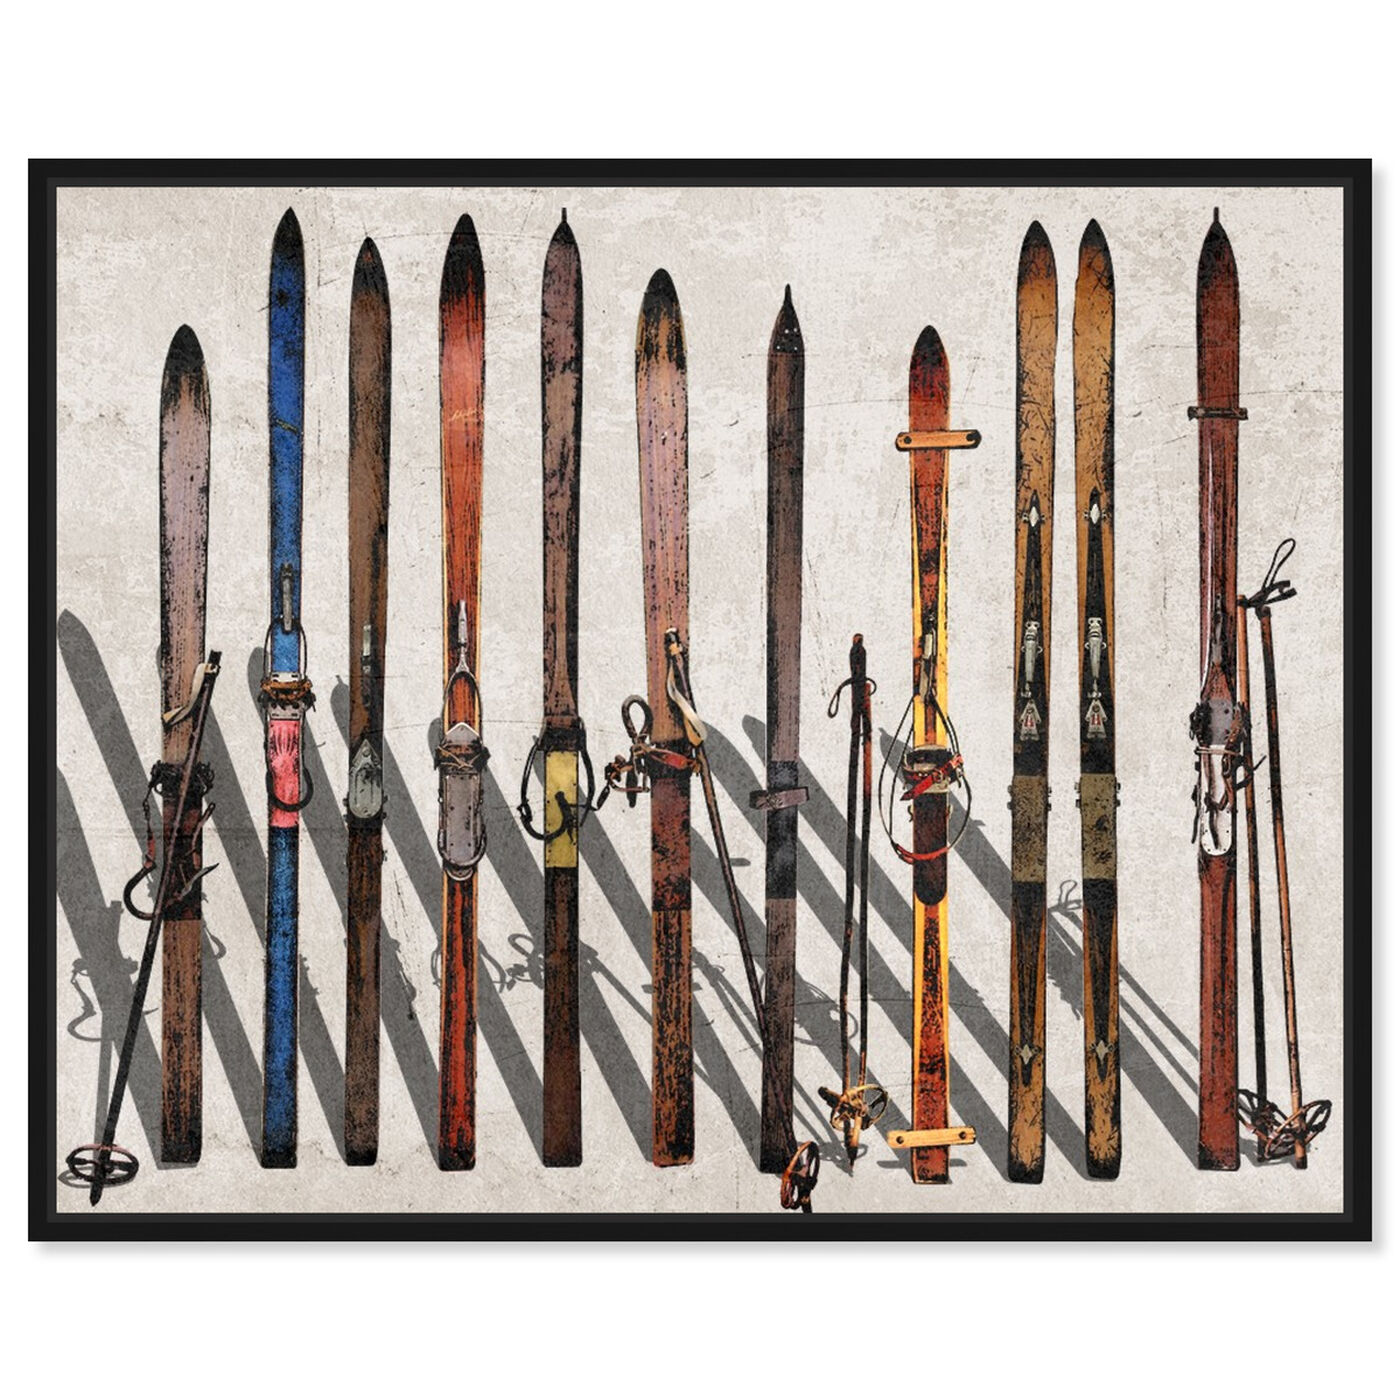 Front view of Vintage Skis featuring sports and teams and skiing art.